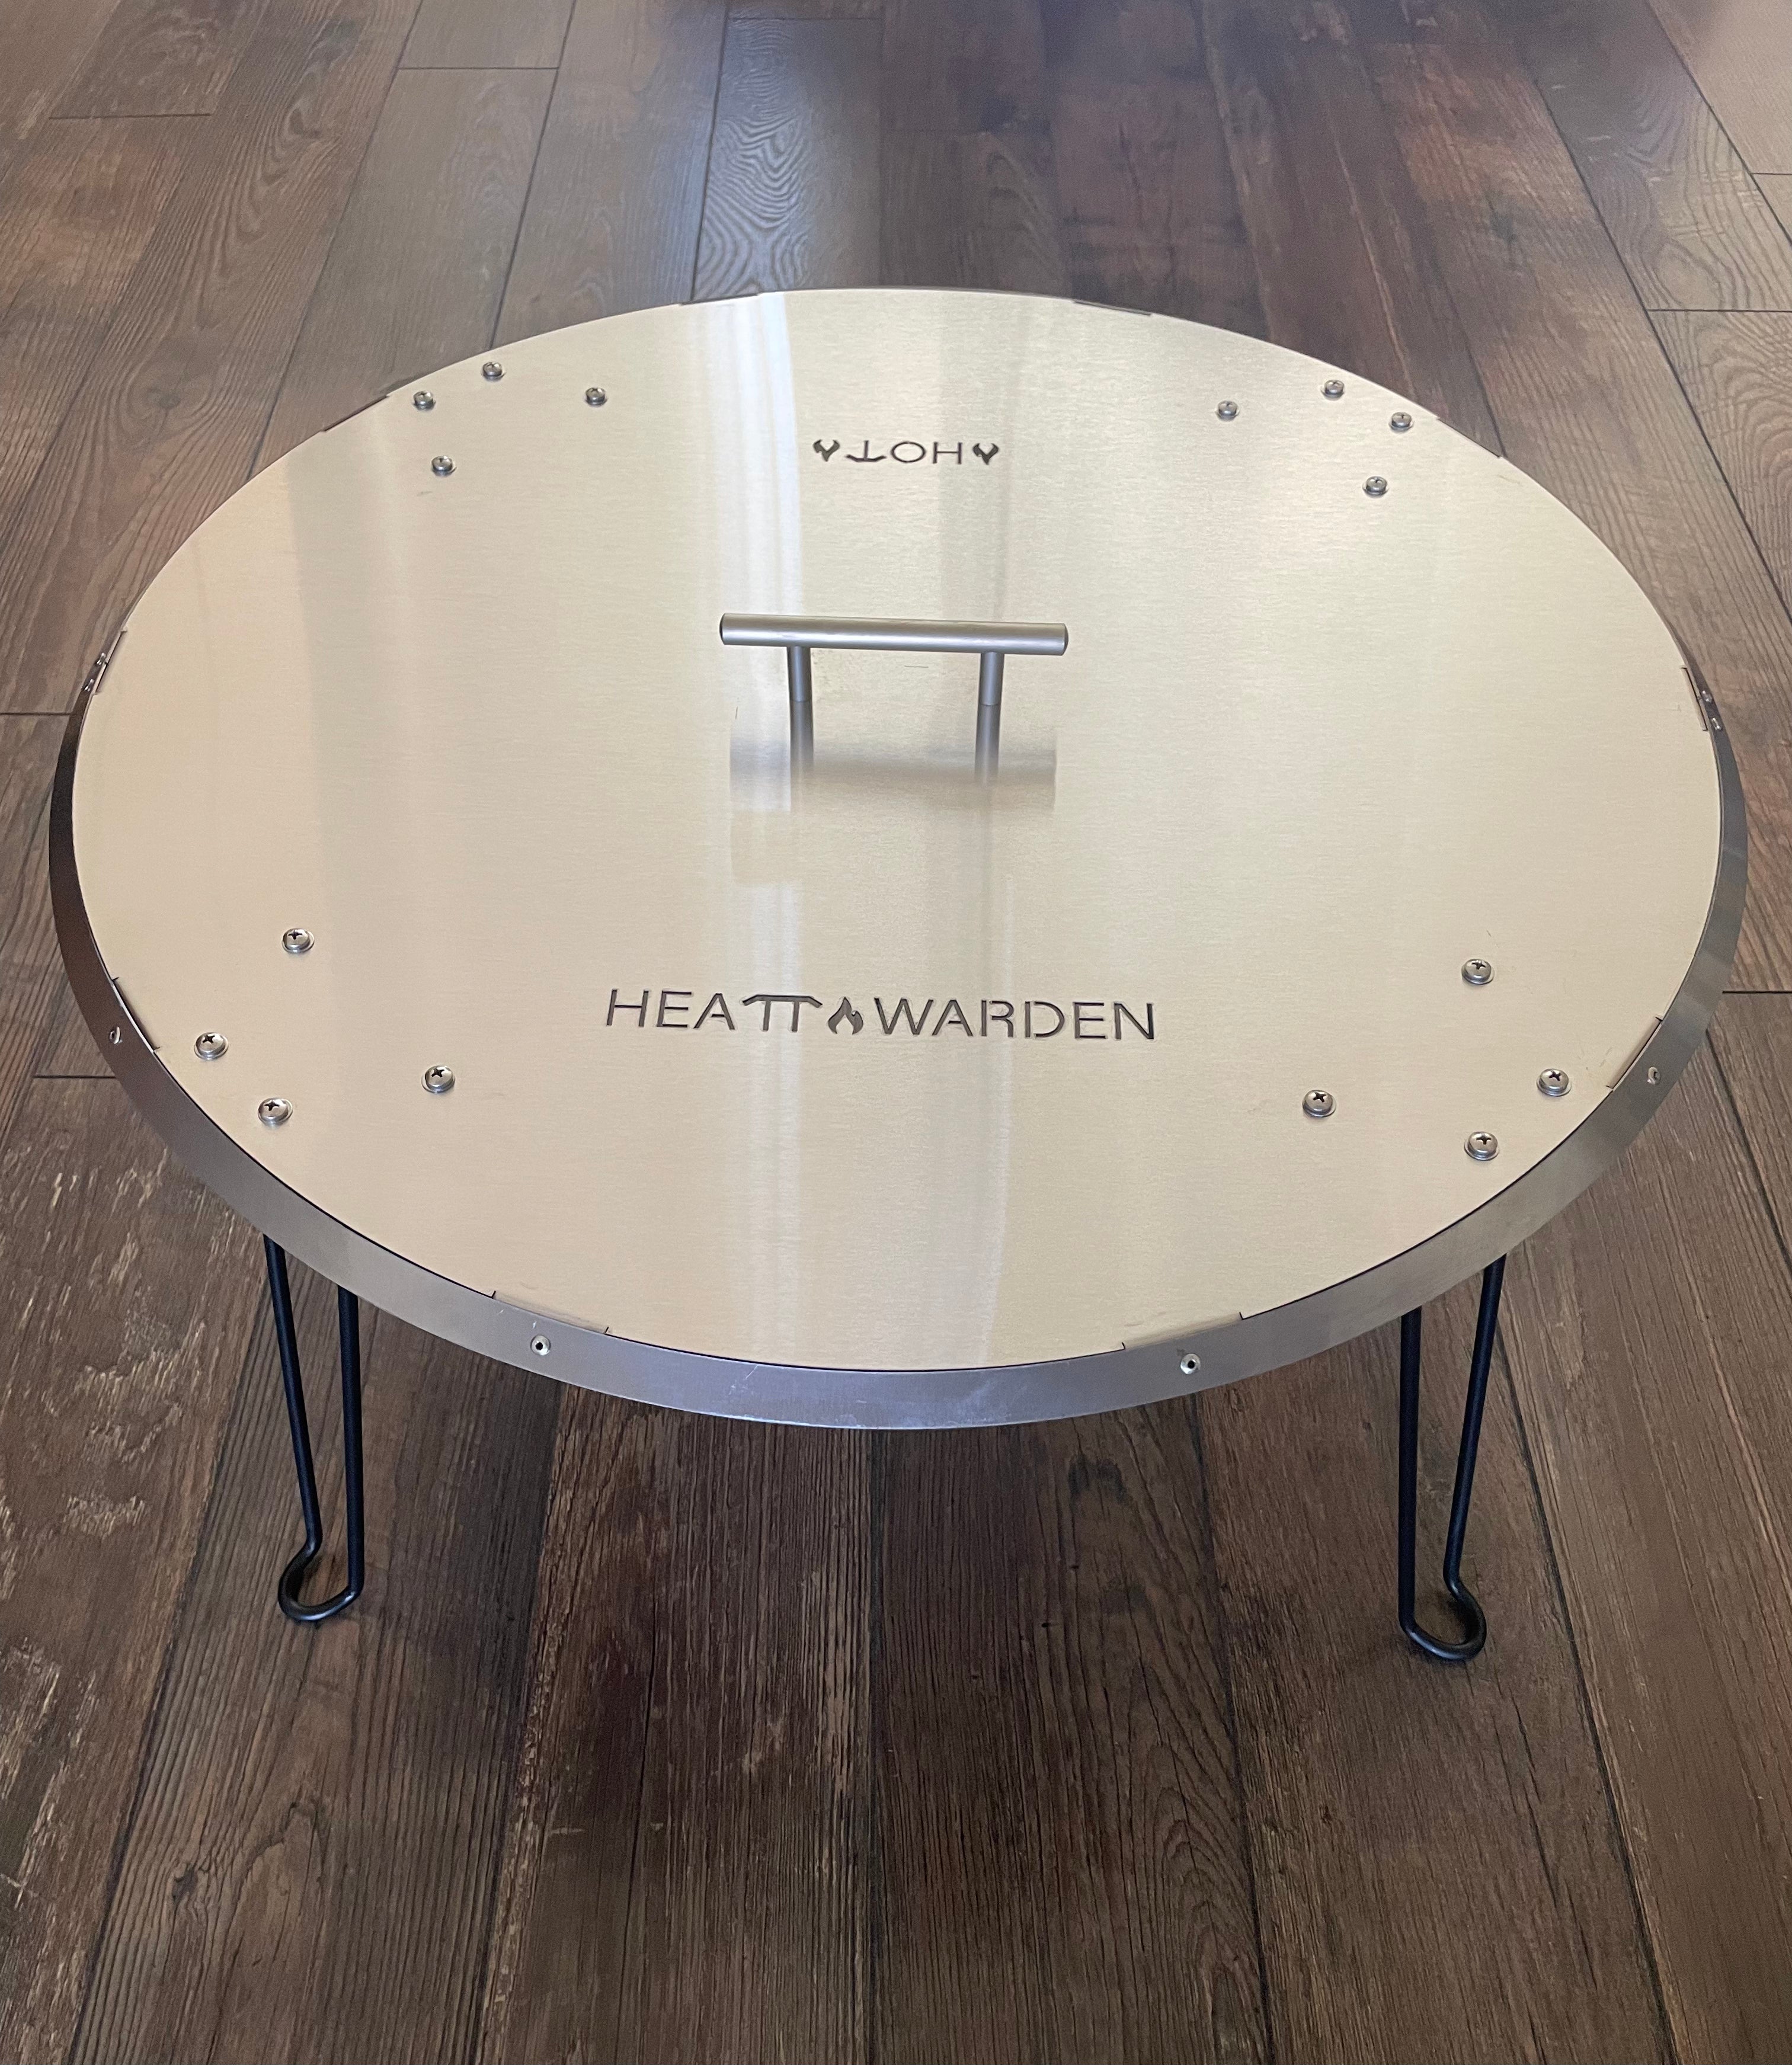 NOW AVAILABLE! NEW! Heat Warden®️ USA Quality 26" ROUND Heat Deflector with 12" Foldable Legs. (See menu above for Specs.)